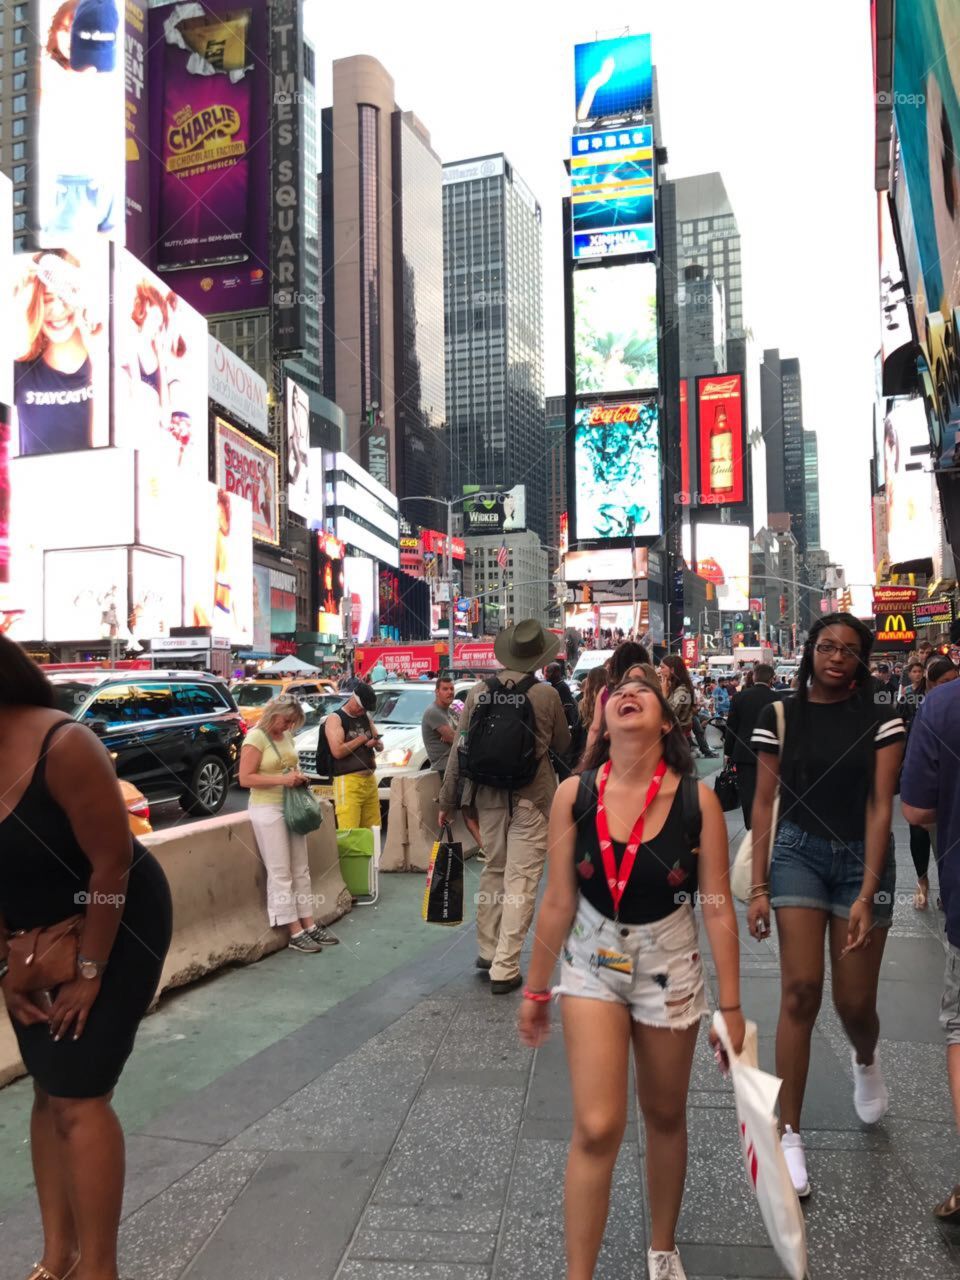 trying to take a got pic in ny, times squares was really fun